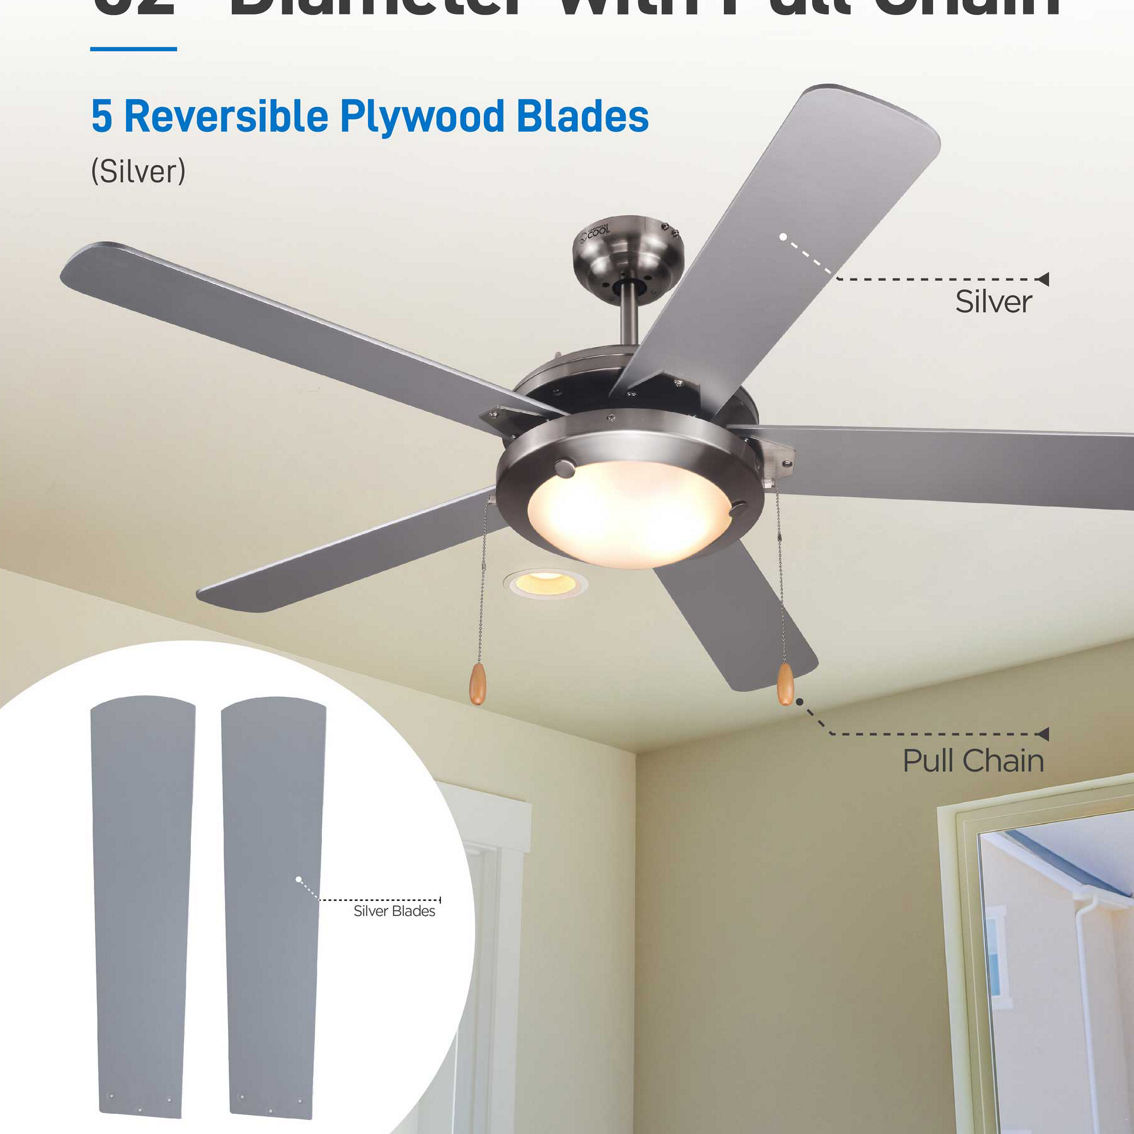 Commercial Cool 52 in. Ceiling Fan - Image 2 of 7